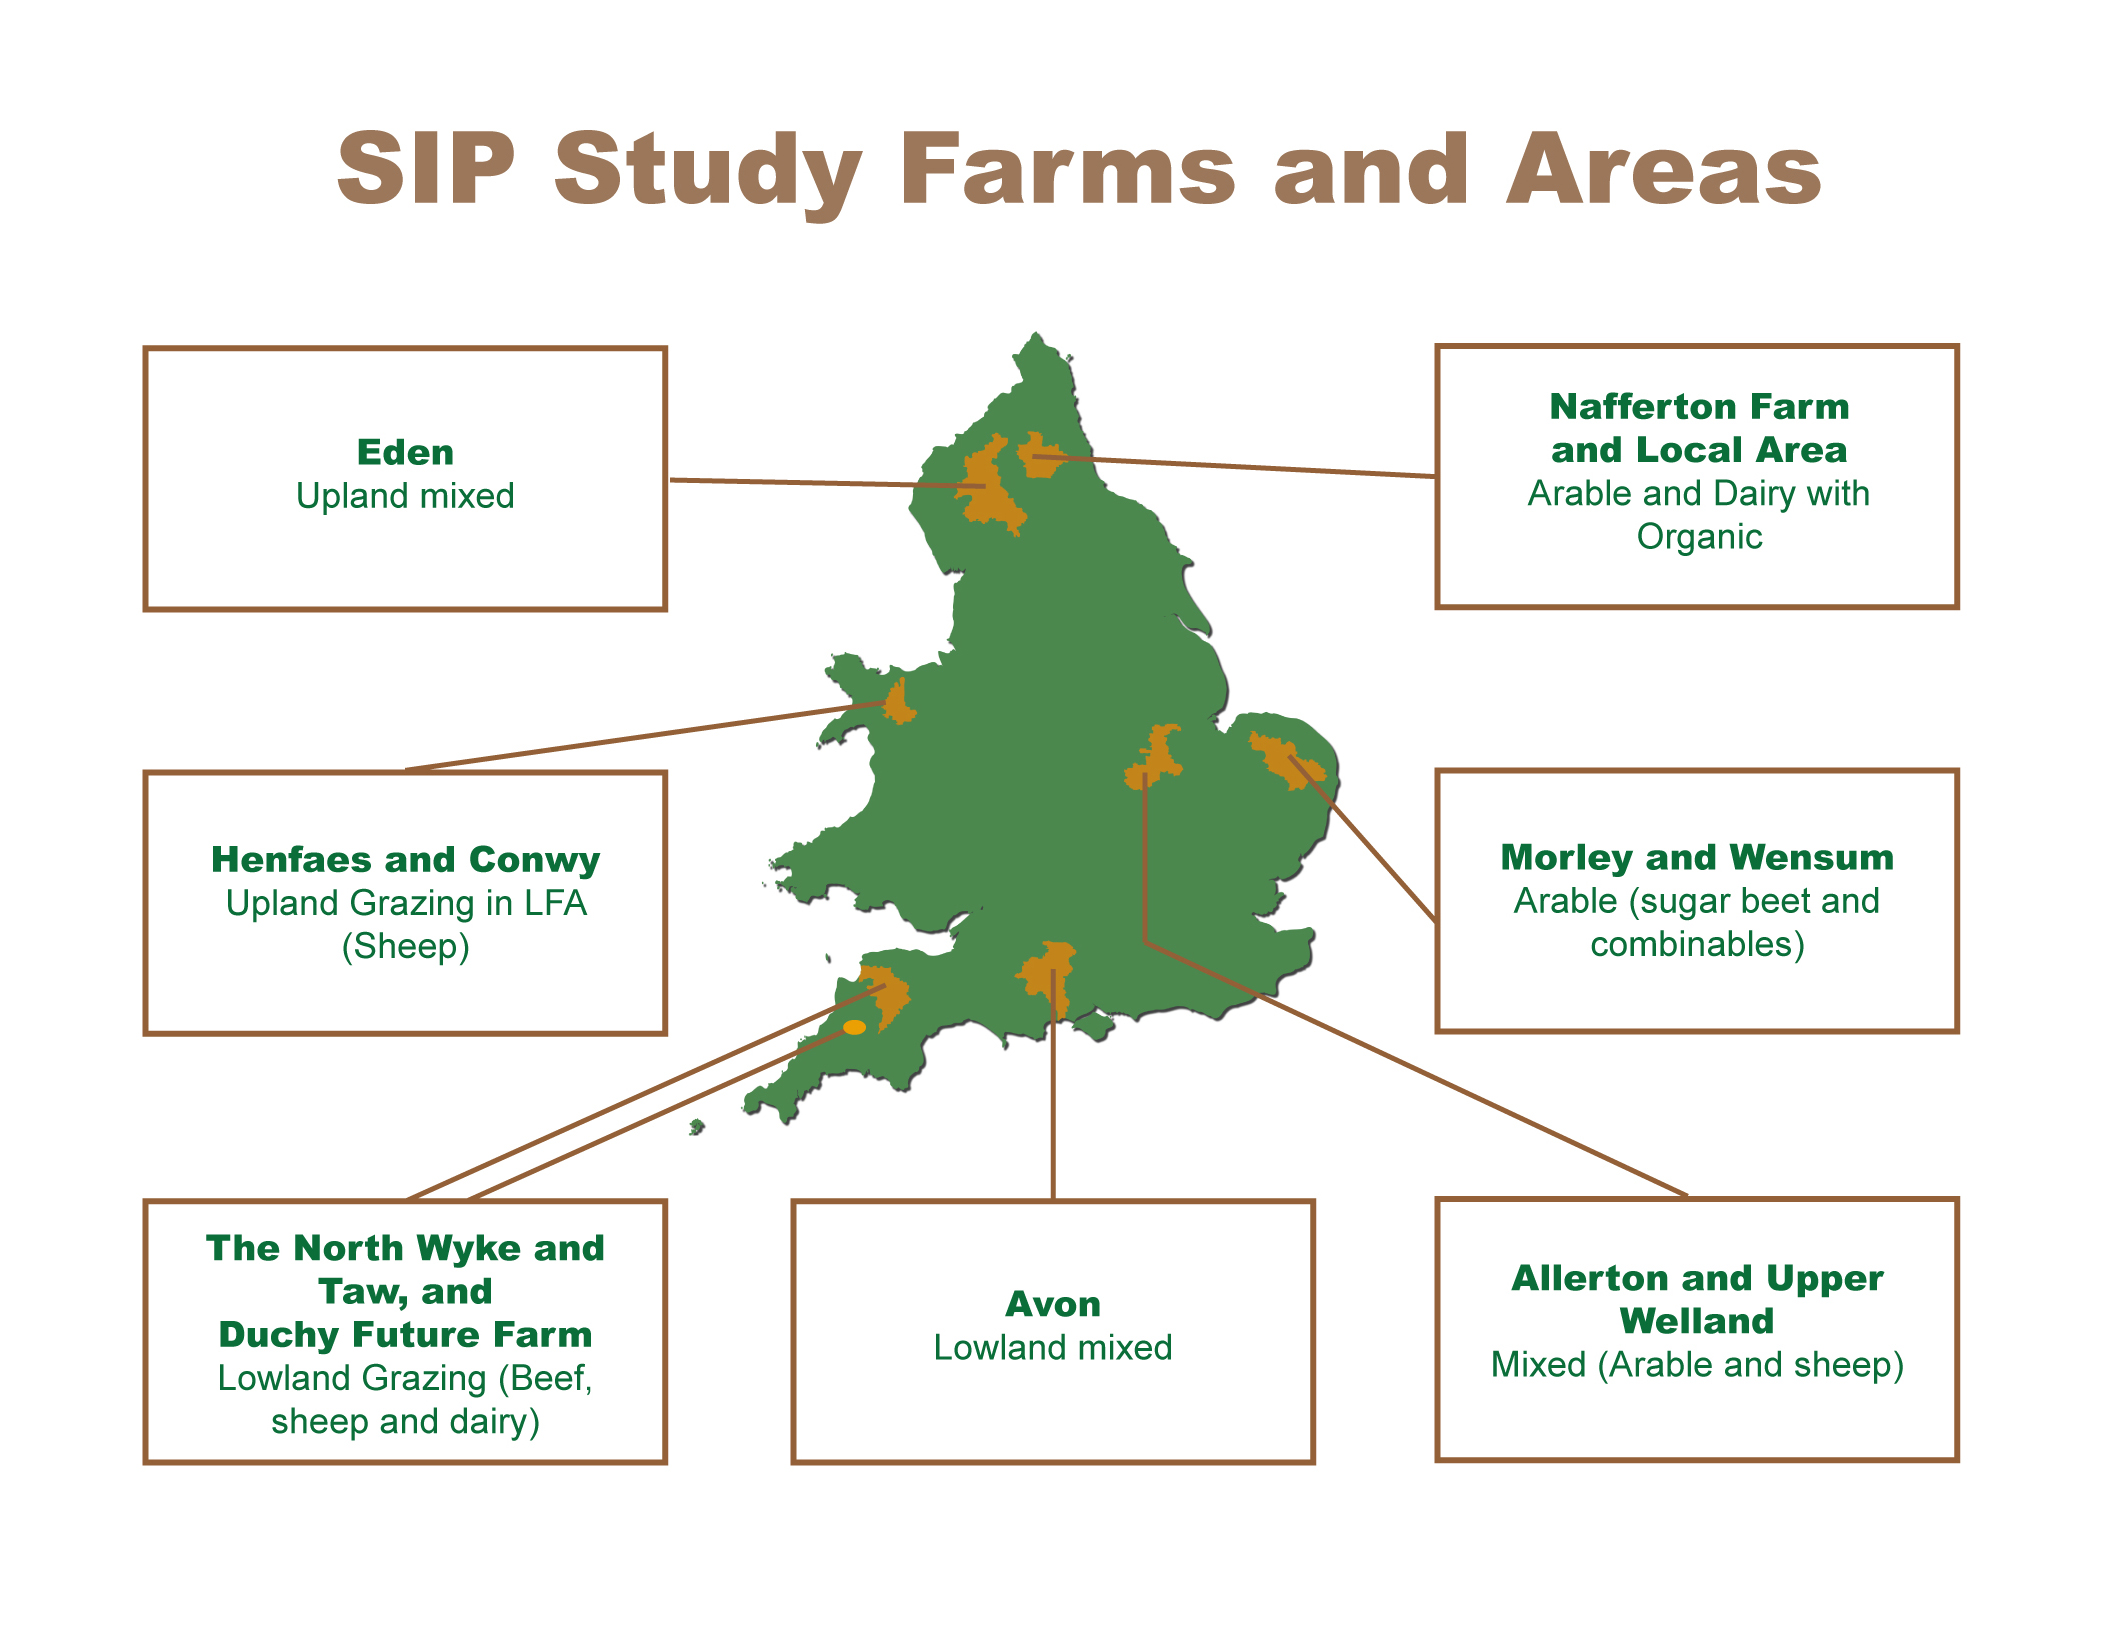 SIP study farms and areas